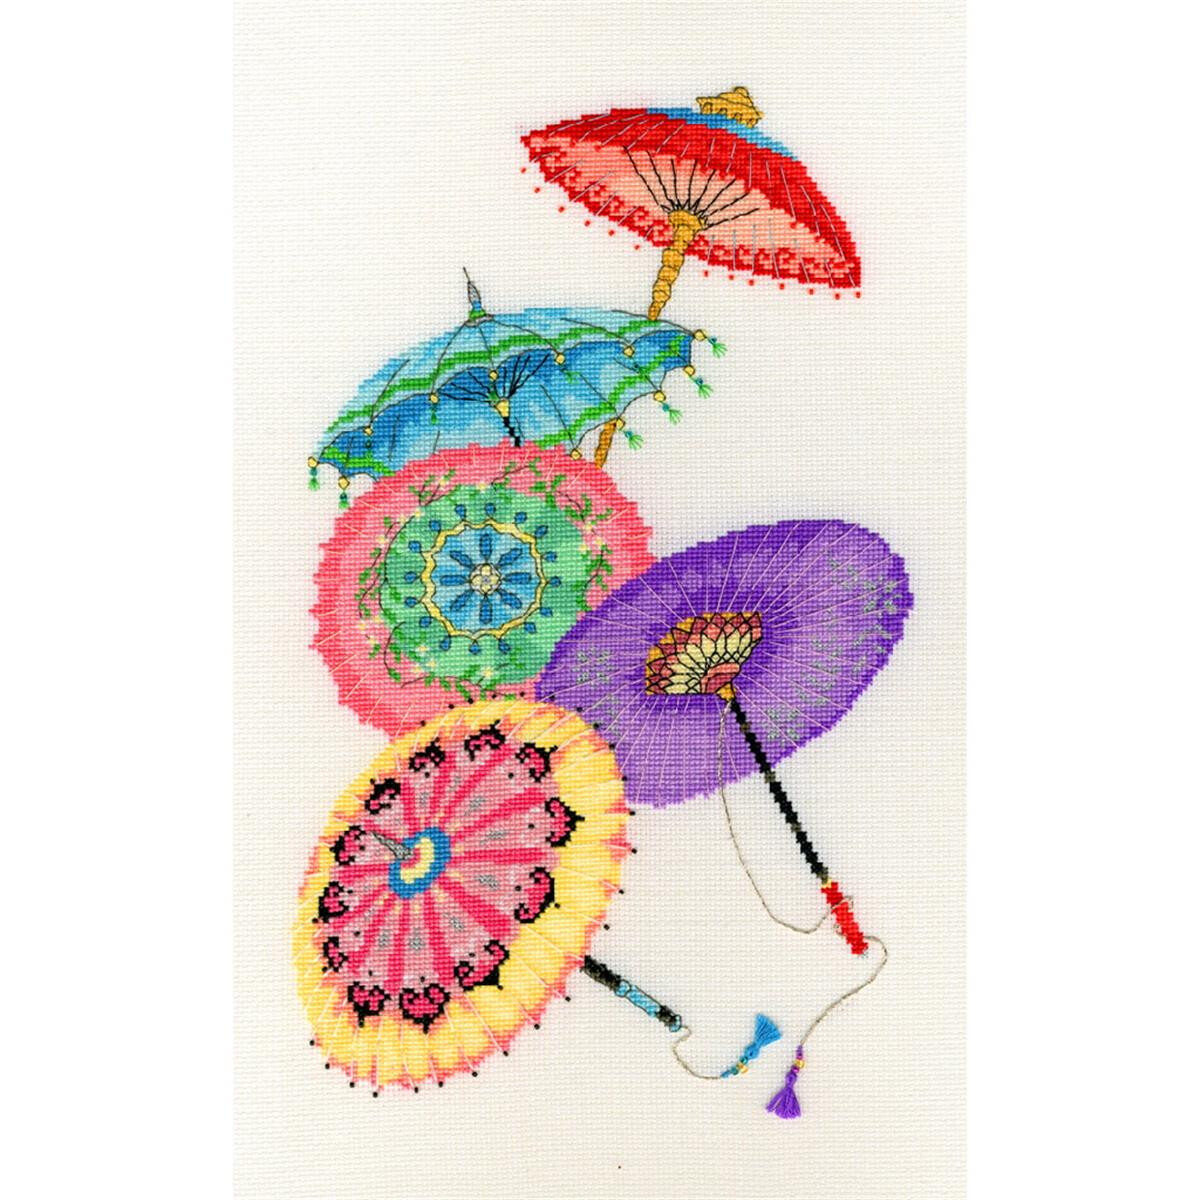 An embroidery pack with four colorful, artistic parasols...